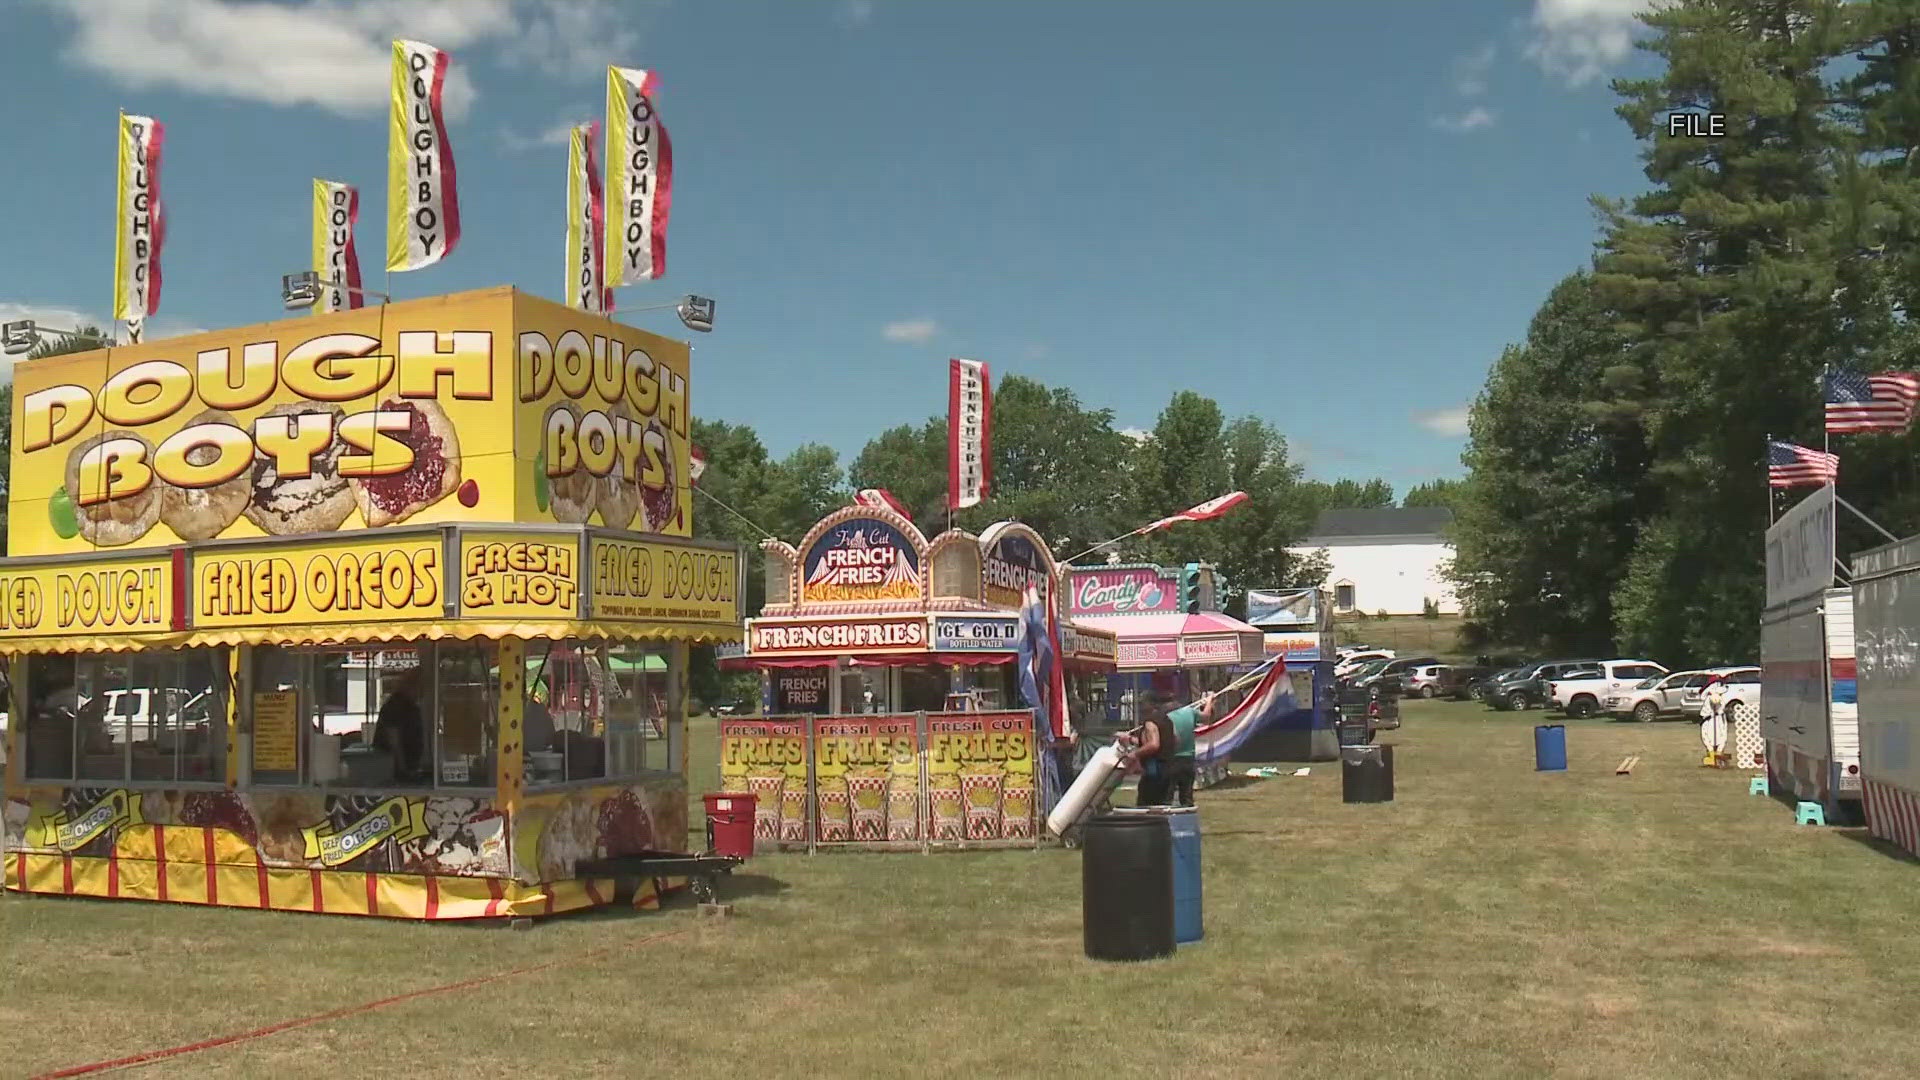 Maine's fairs run from June to October. The Maine Association of Agricultural Fairs lists 25 fairs on its schedule.